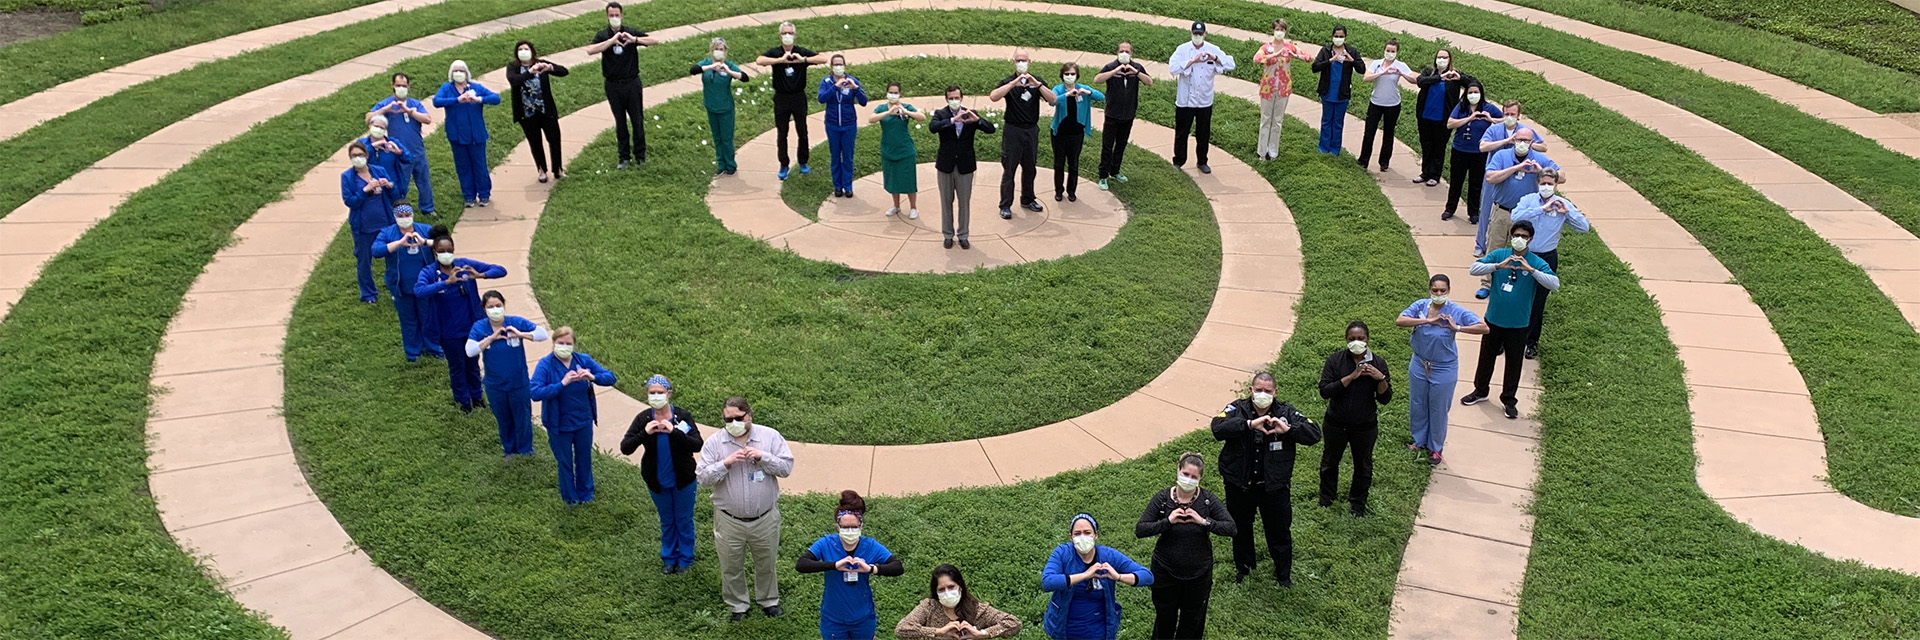 Texas Health Alliance Staff Forming Heart in the Garden